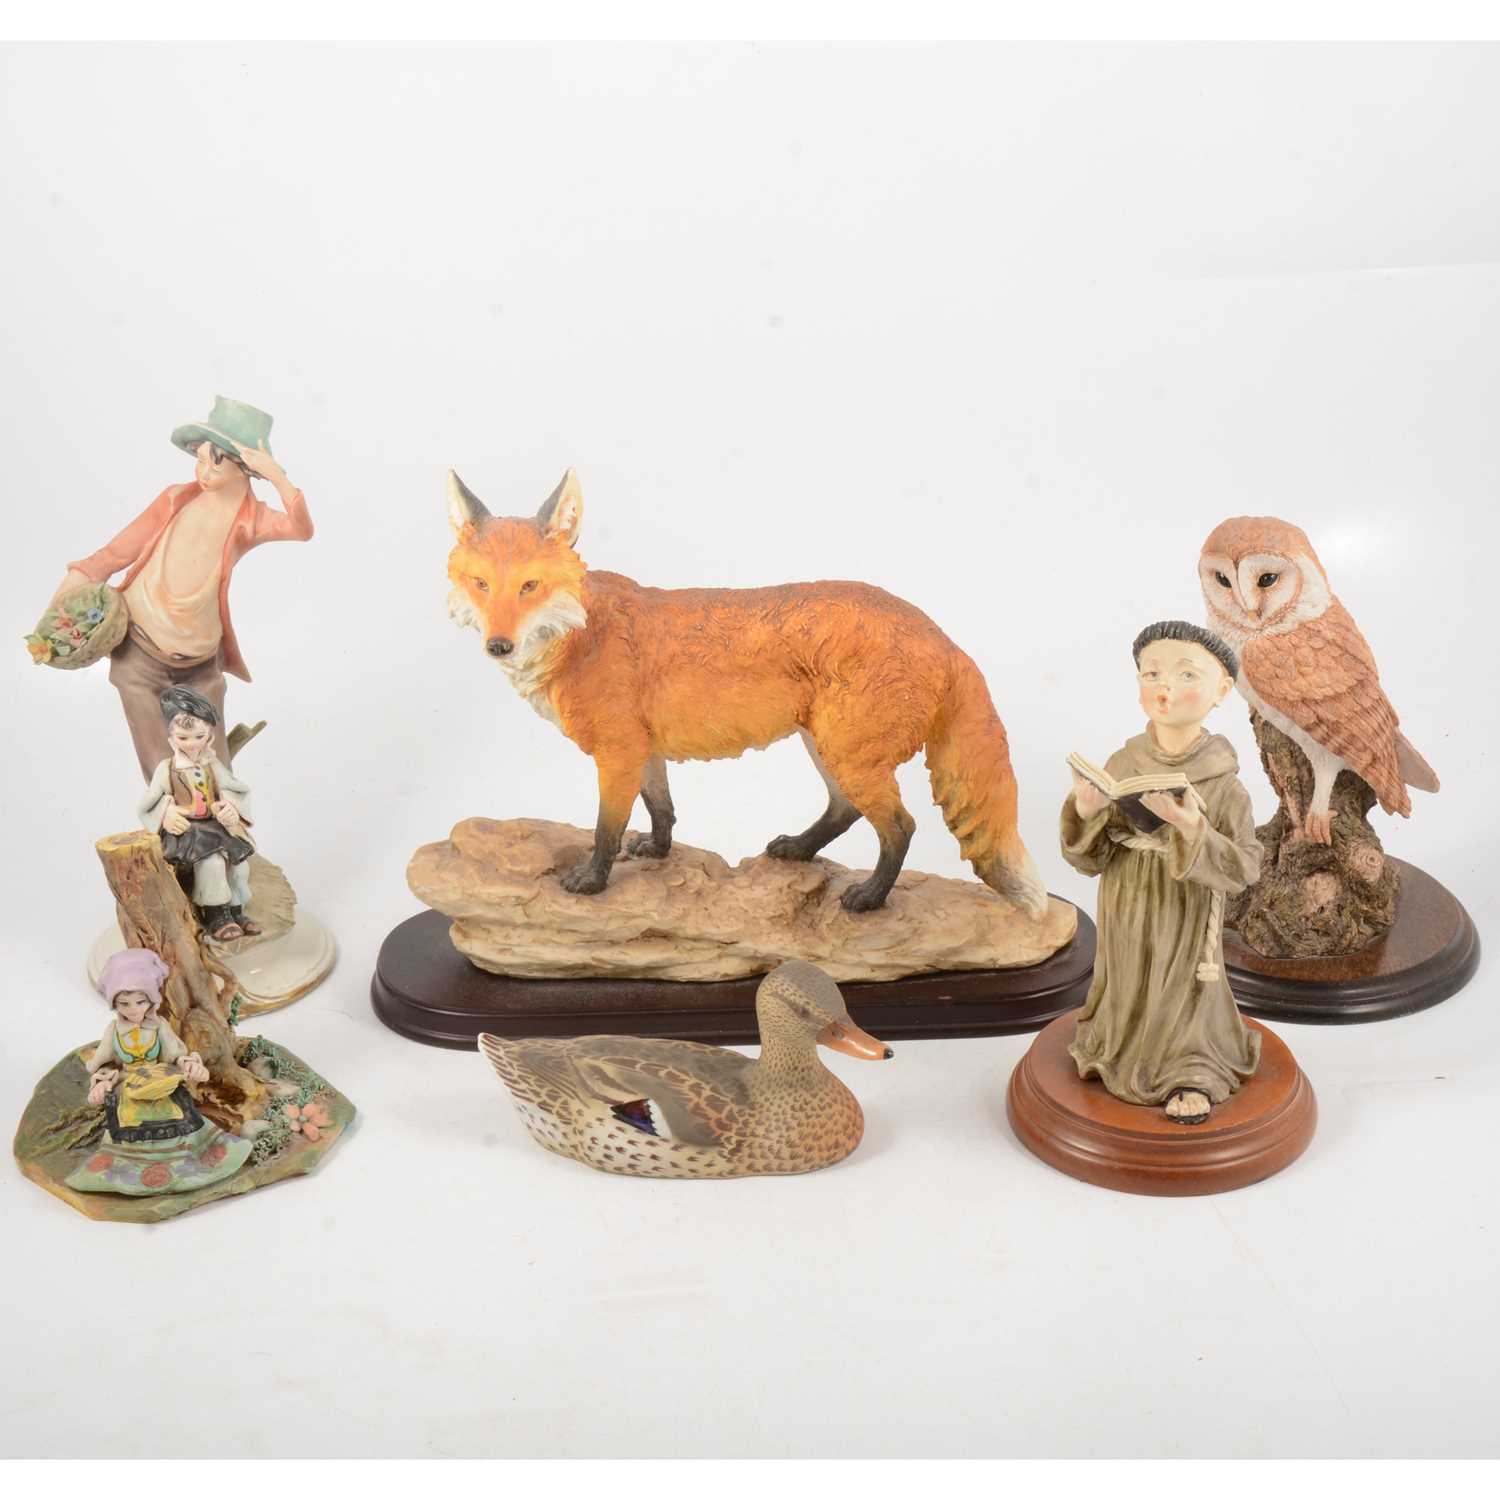 Lot 55 - Leonardo resin model of the Leicestershire Fox, and other models